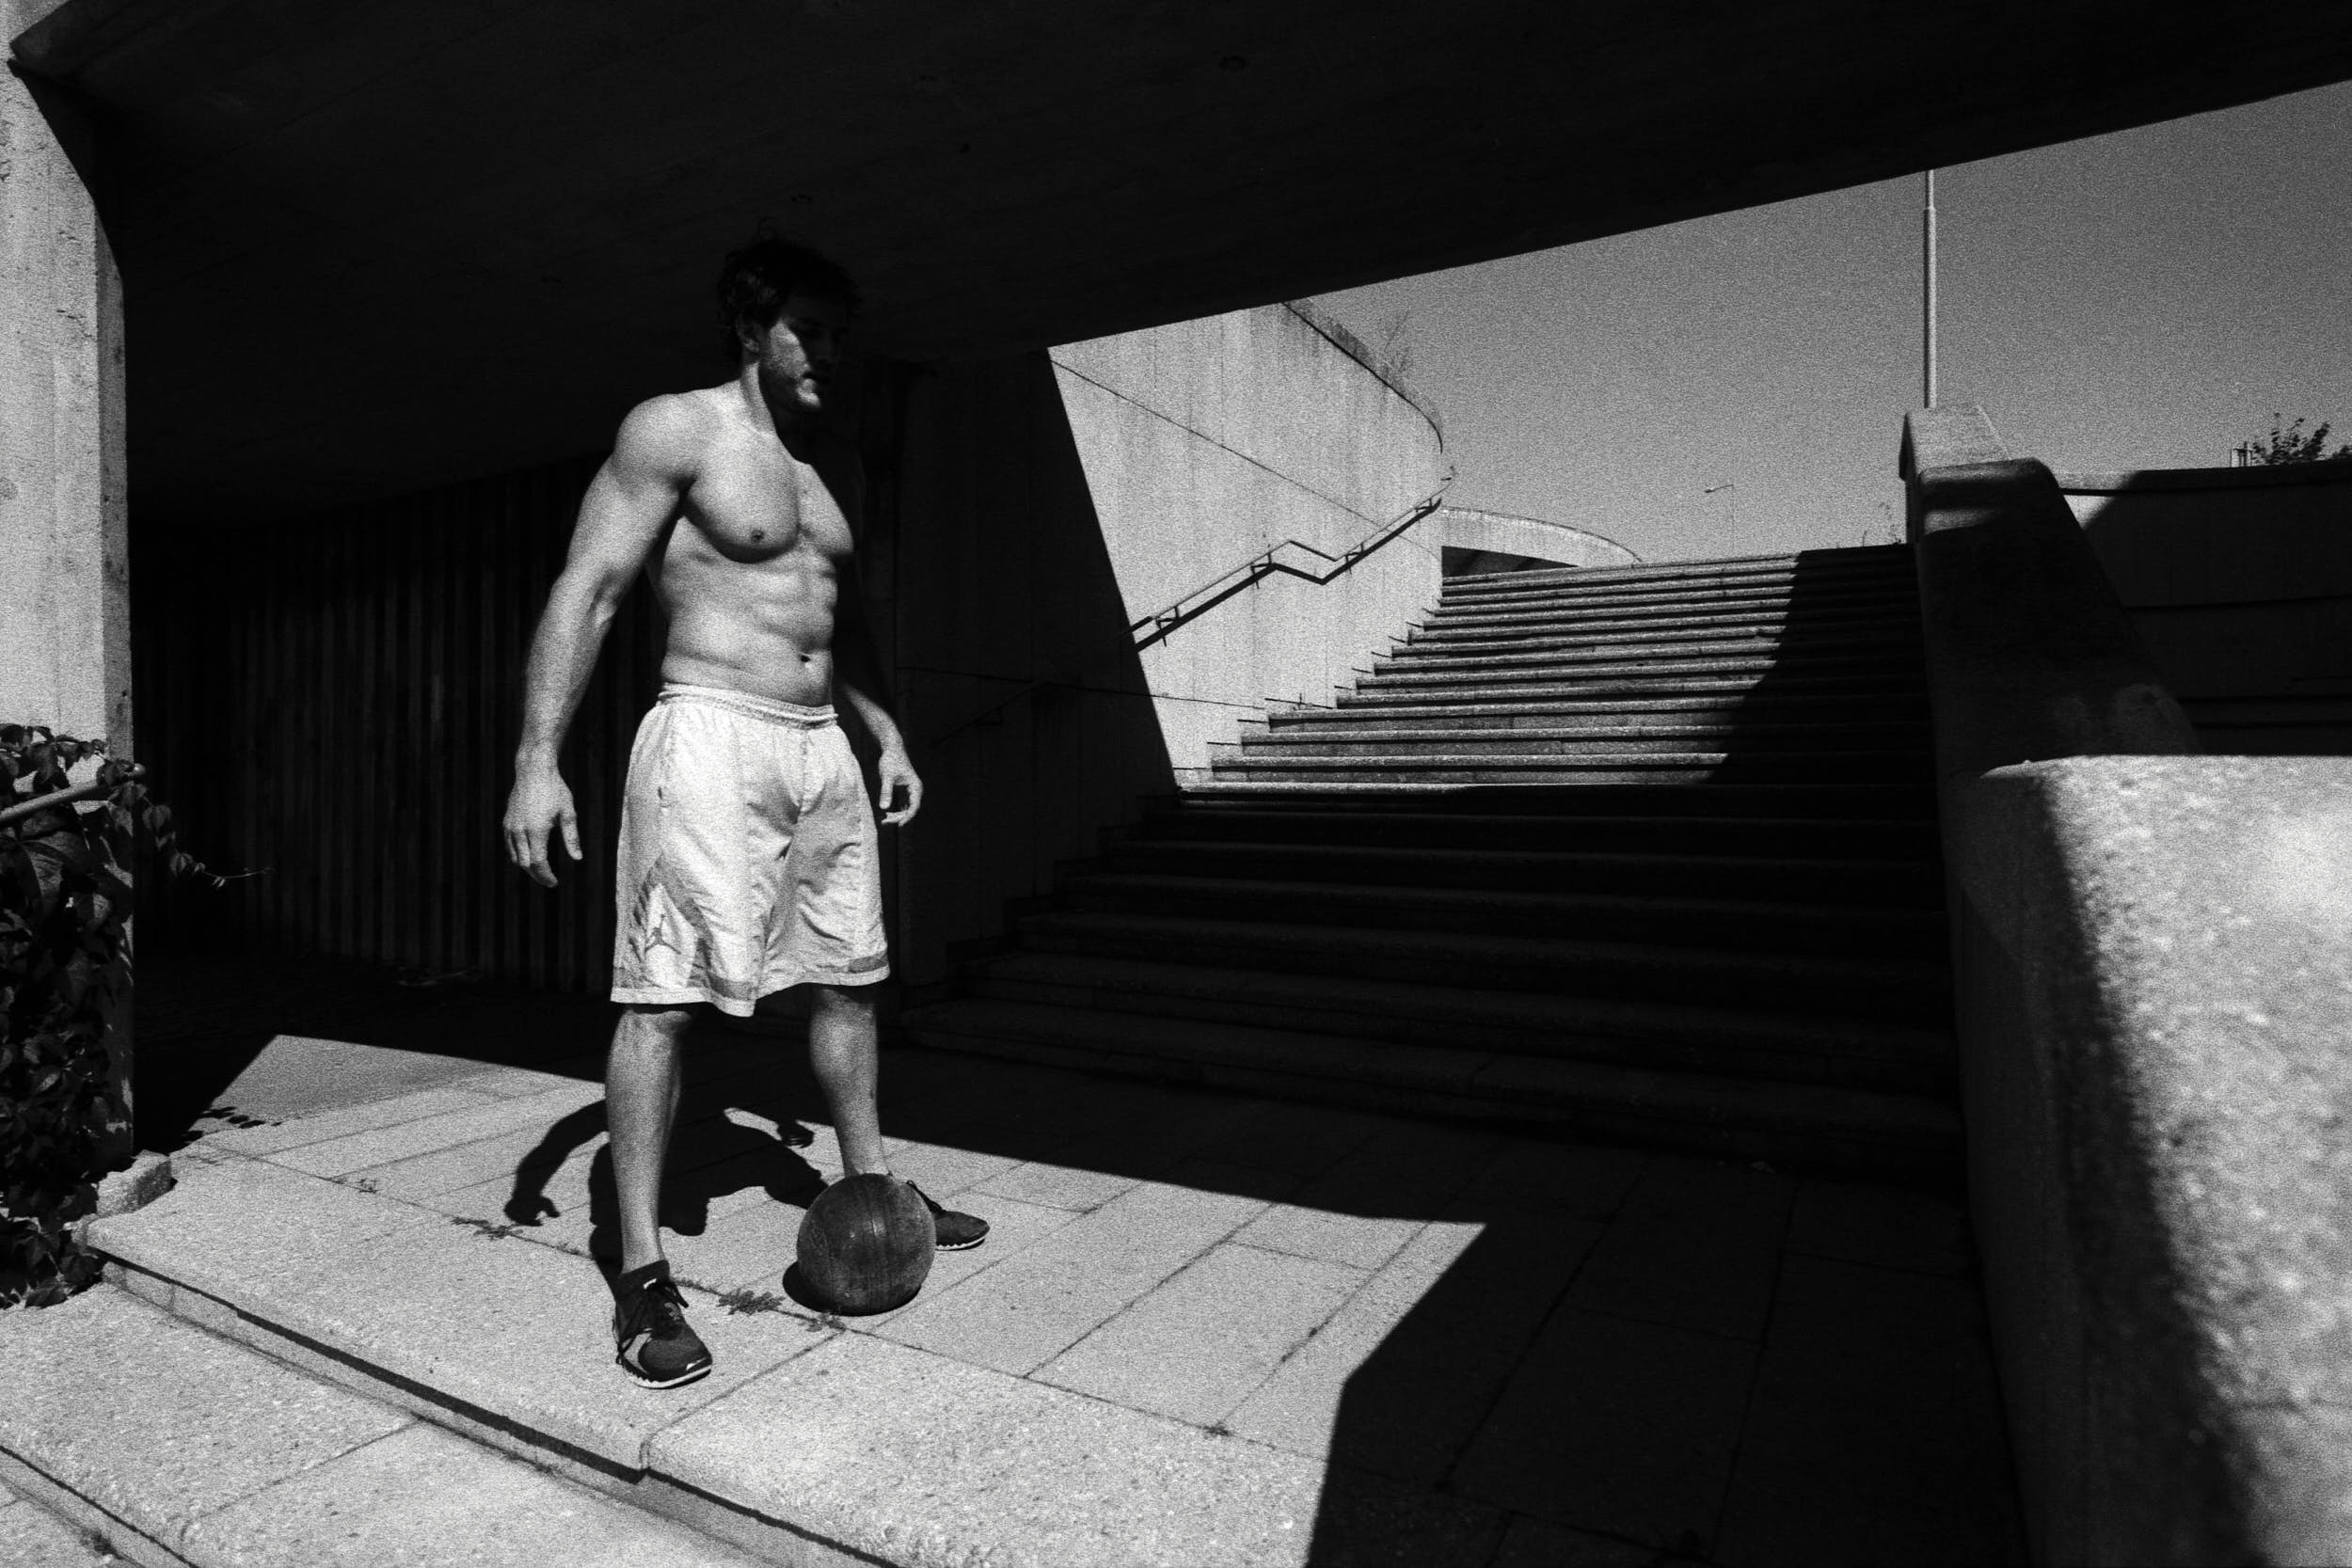 Crossfit athlete on a brutalist staircase preparing for a work out with a medicine ball.